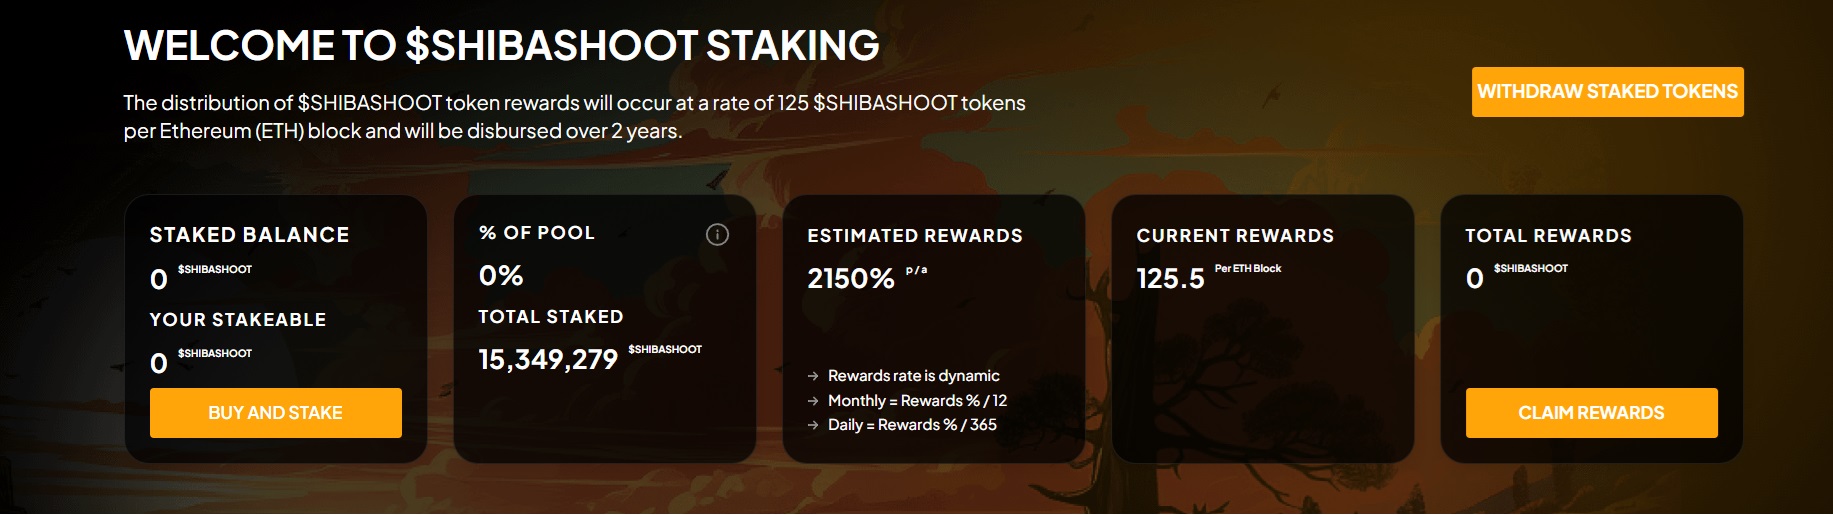 Shiba Shootout offers very high wagering rewards